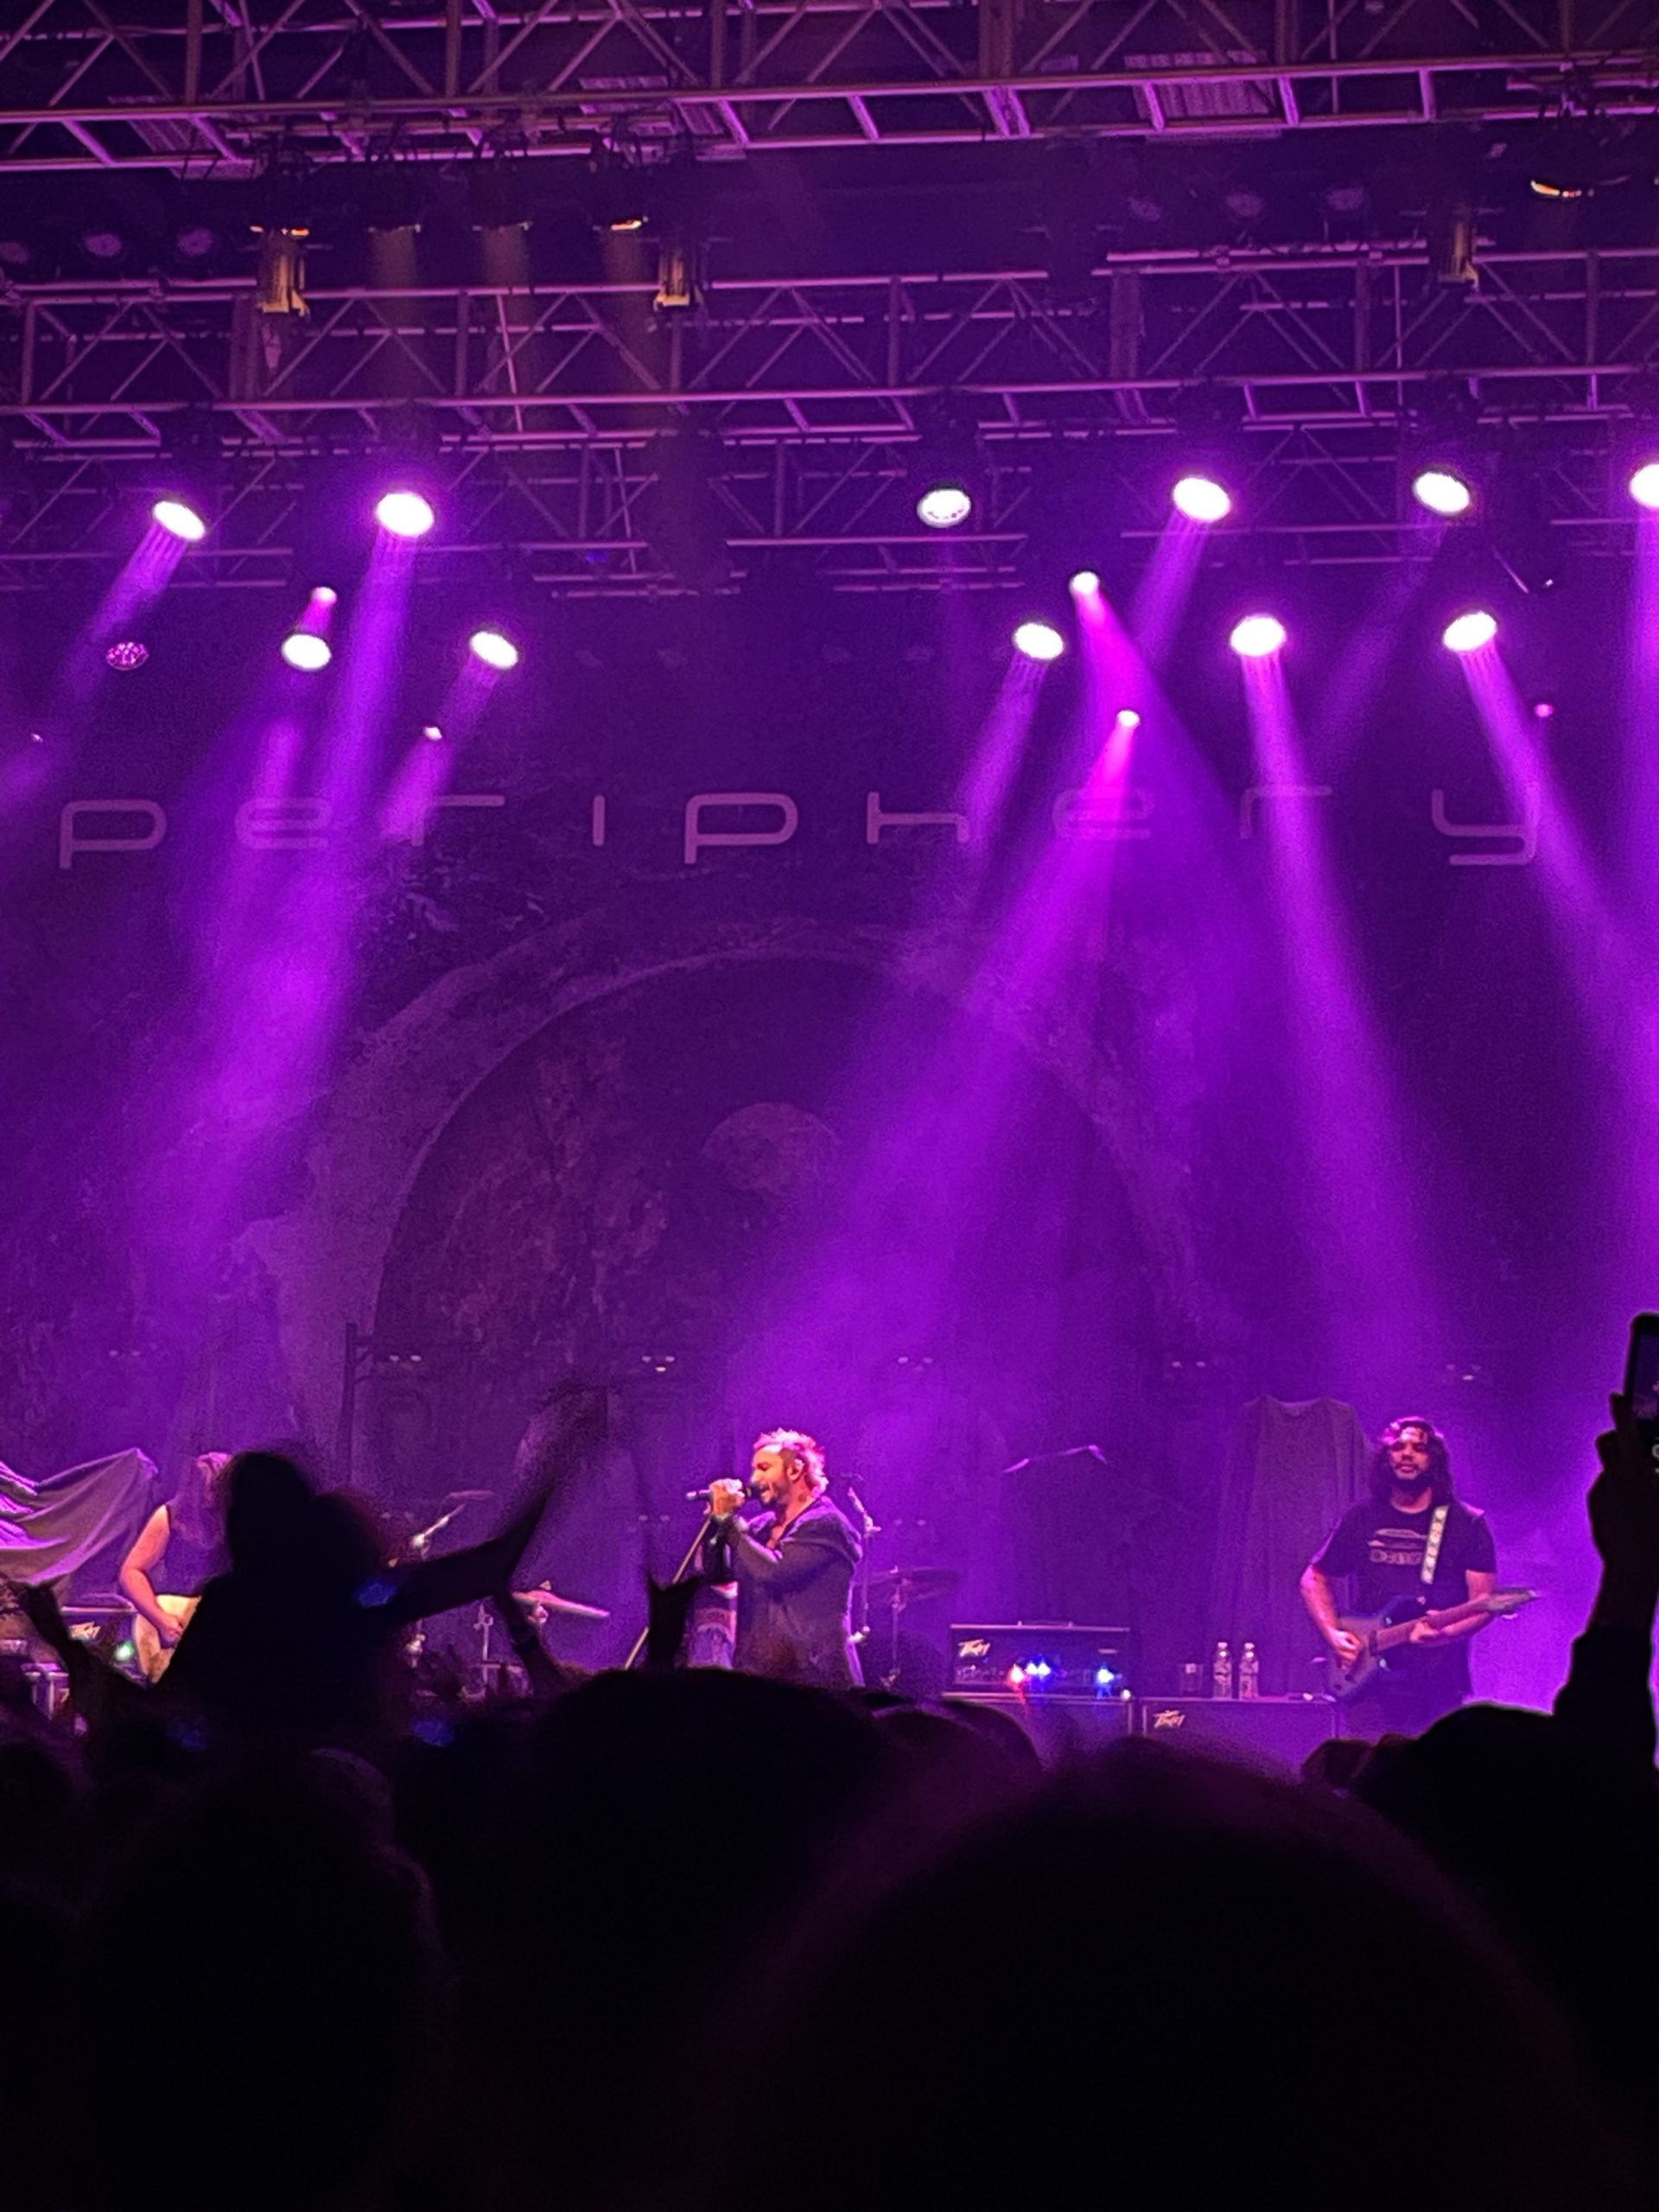 Periphery plays Atropos for the first time during the first night of their tour with Loathe and Underoath at the Fillmore on Mar. 3.